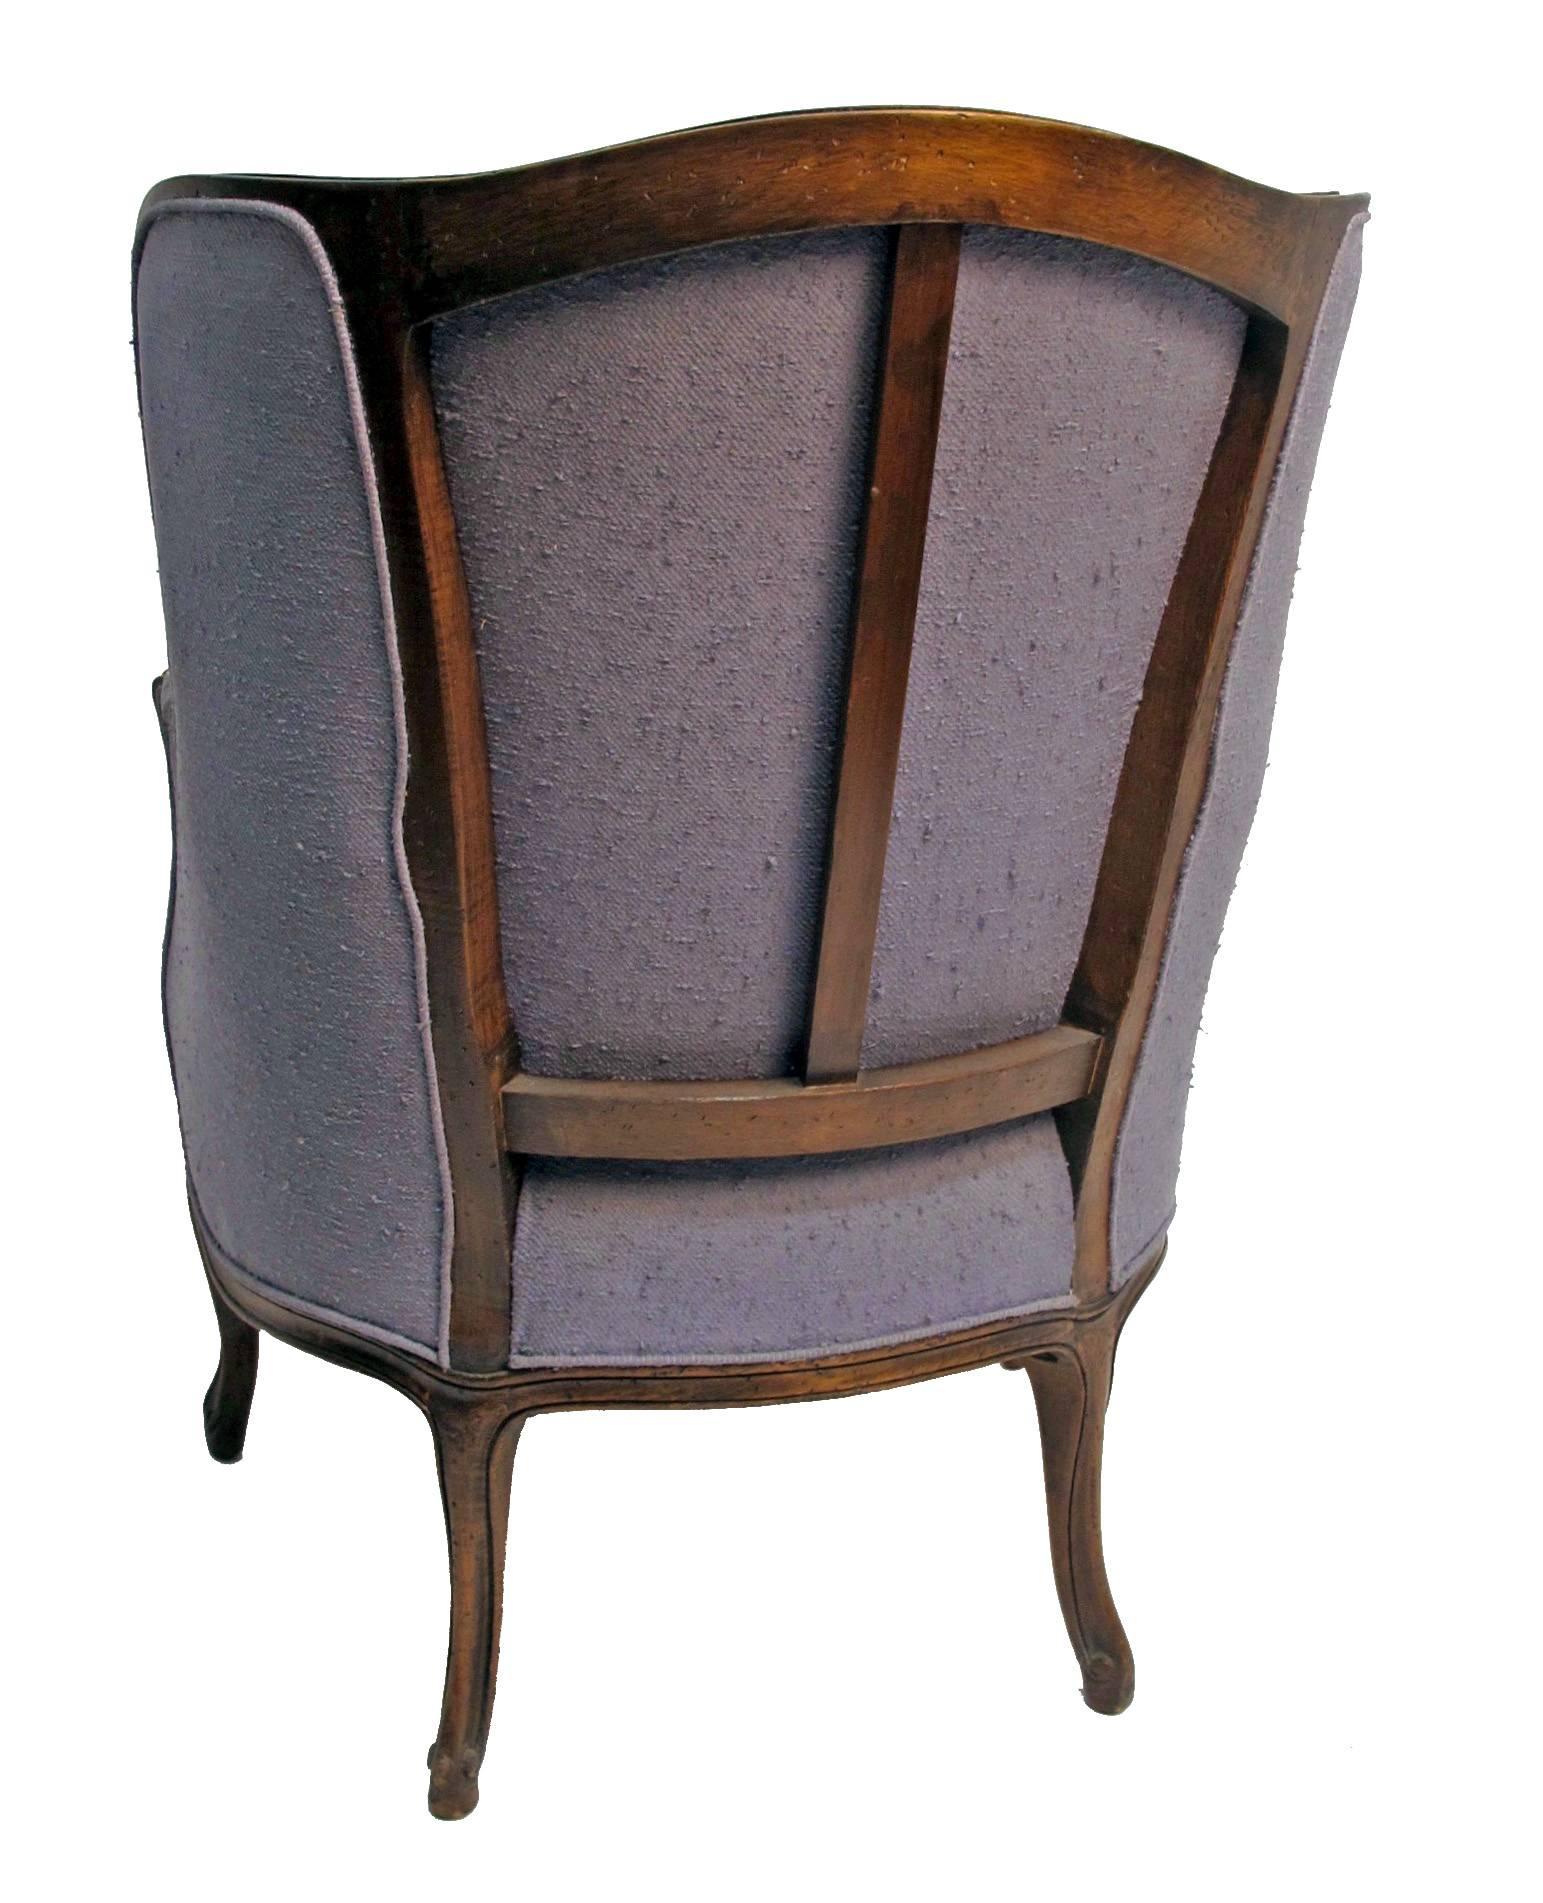 20th Century French Bergere Style Chair